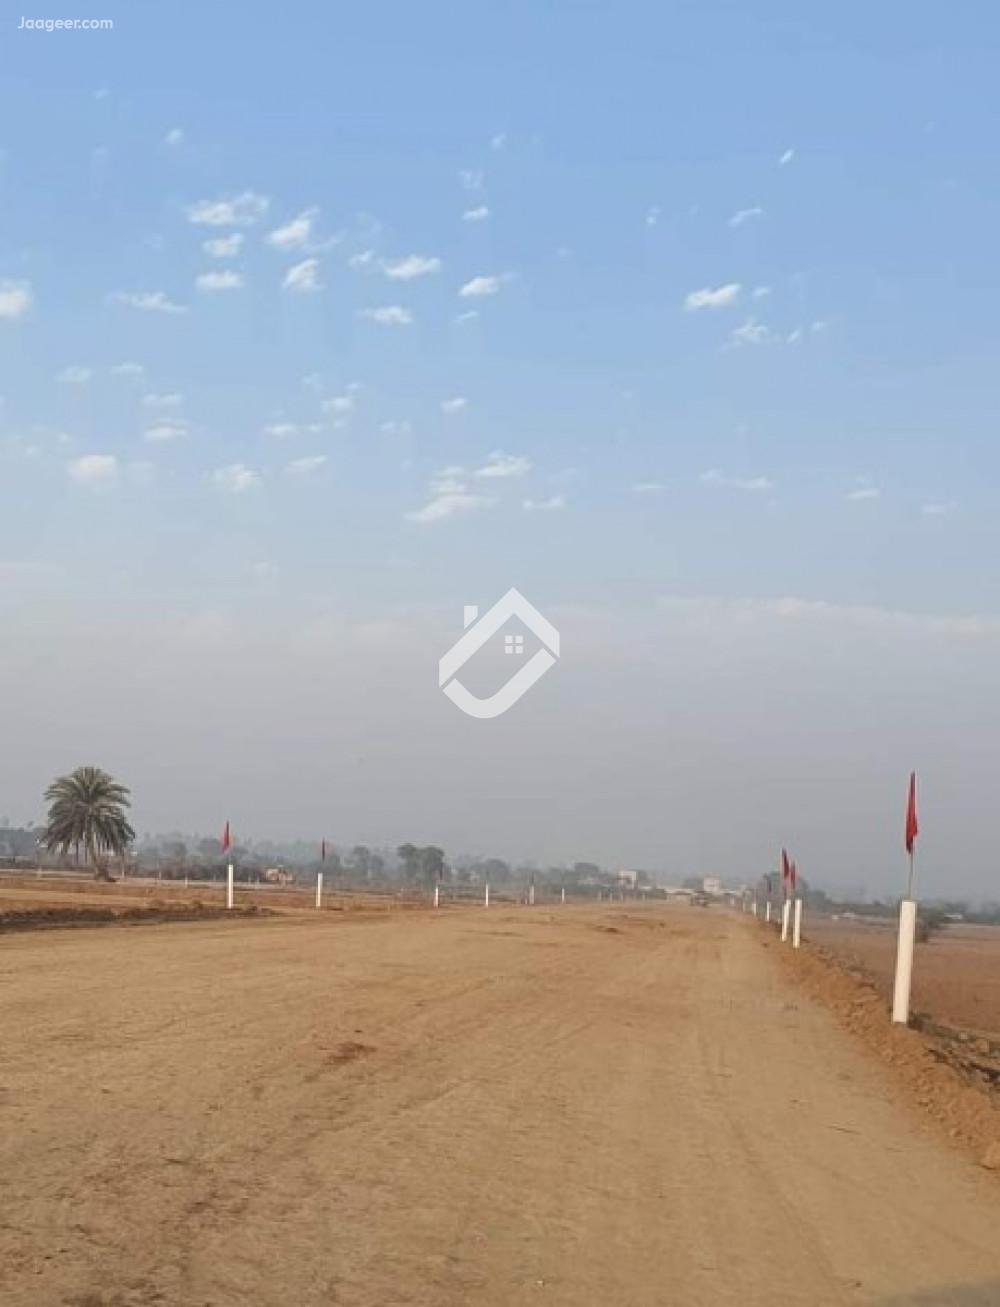 Main image 5 Marla Residential Plot For Sale In Shalimar Smart City Phase -1 The Golf Avenue Sector-II Shalimar Smart city sector 2